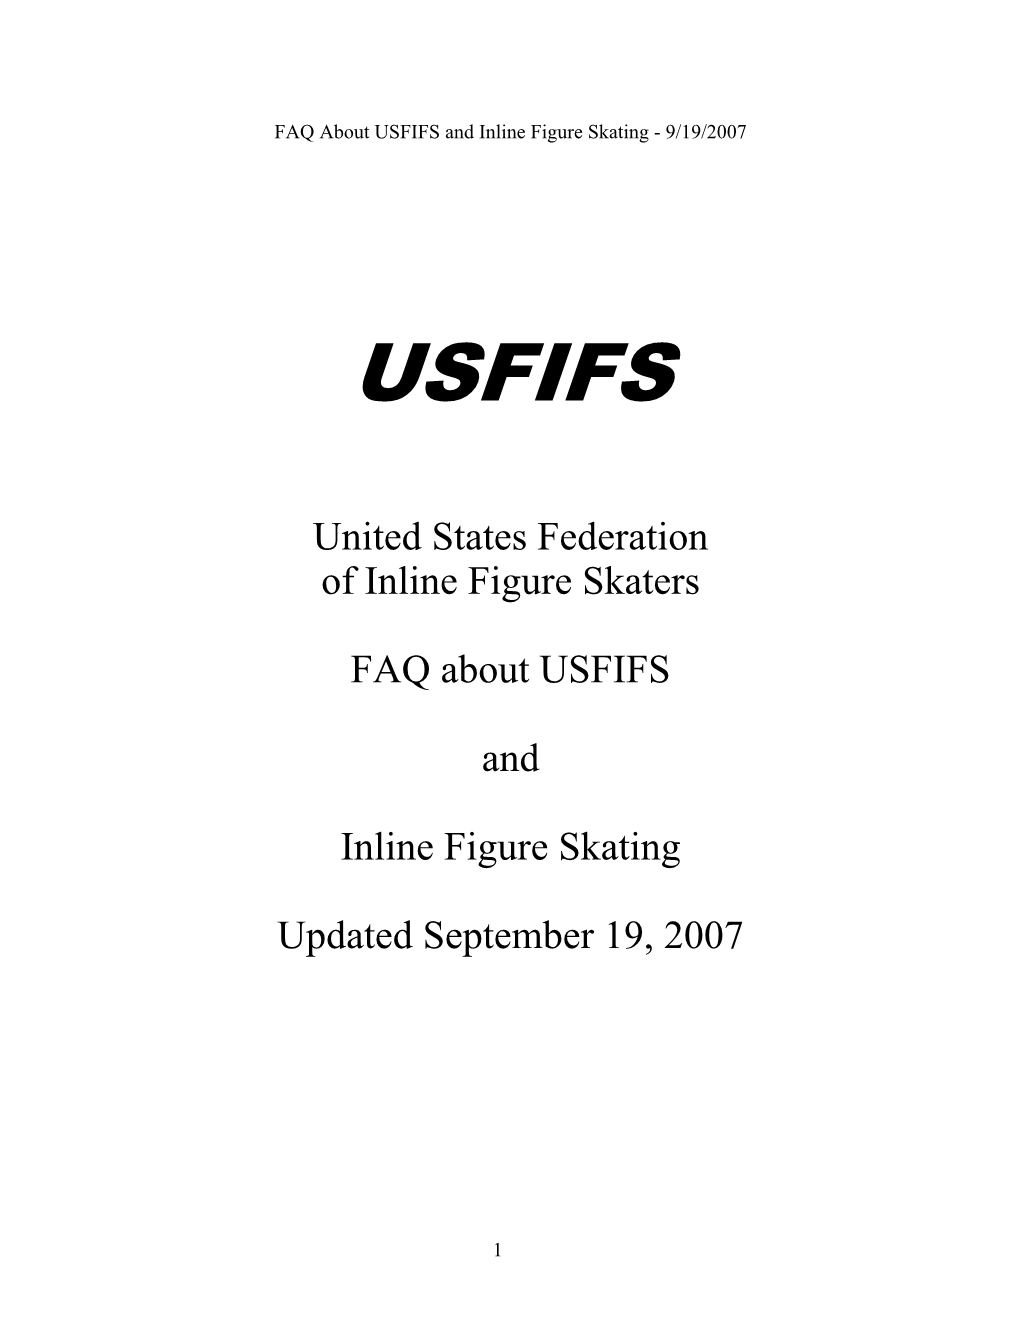 USFIFS and Inline Figure Skating - 9/19/2007